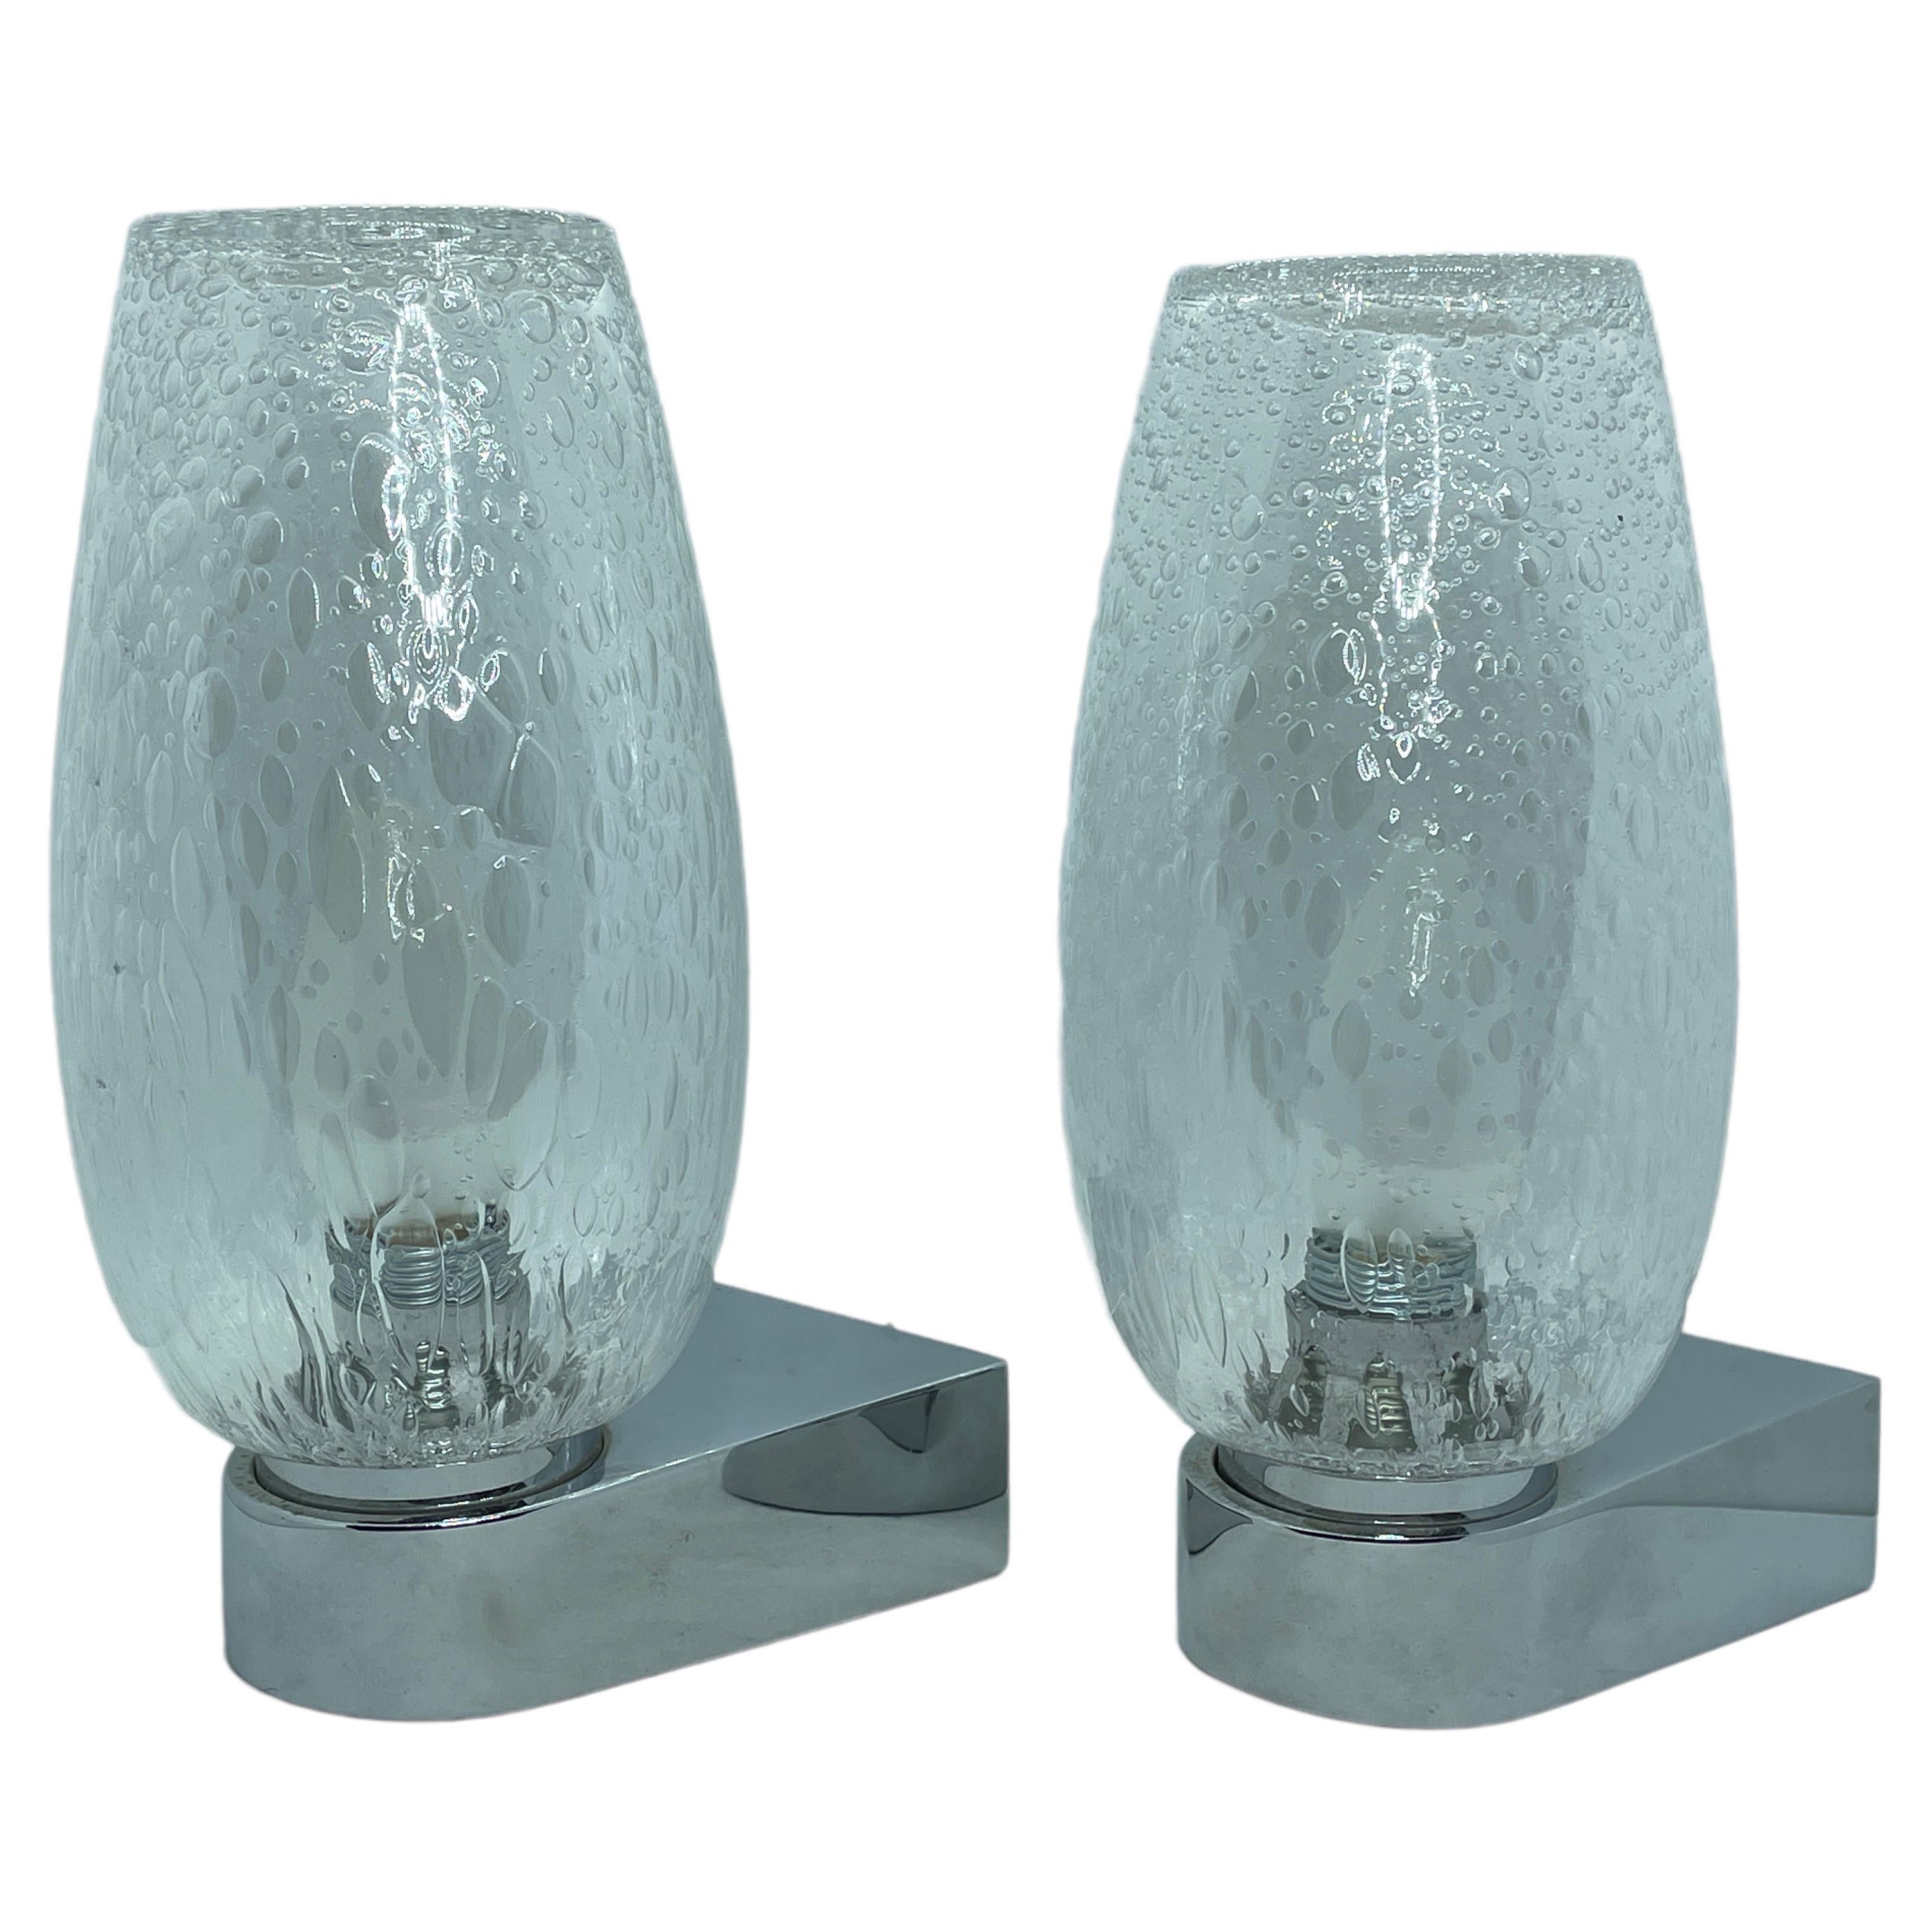 Pair of 1970s German Bubble Glass and Chrome Sconces, Vintage Mid-Century Modern For Sale